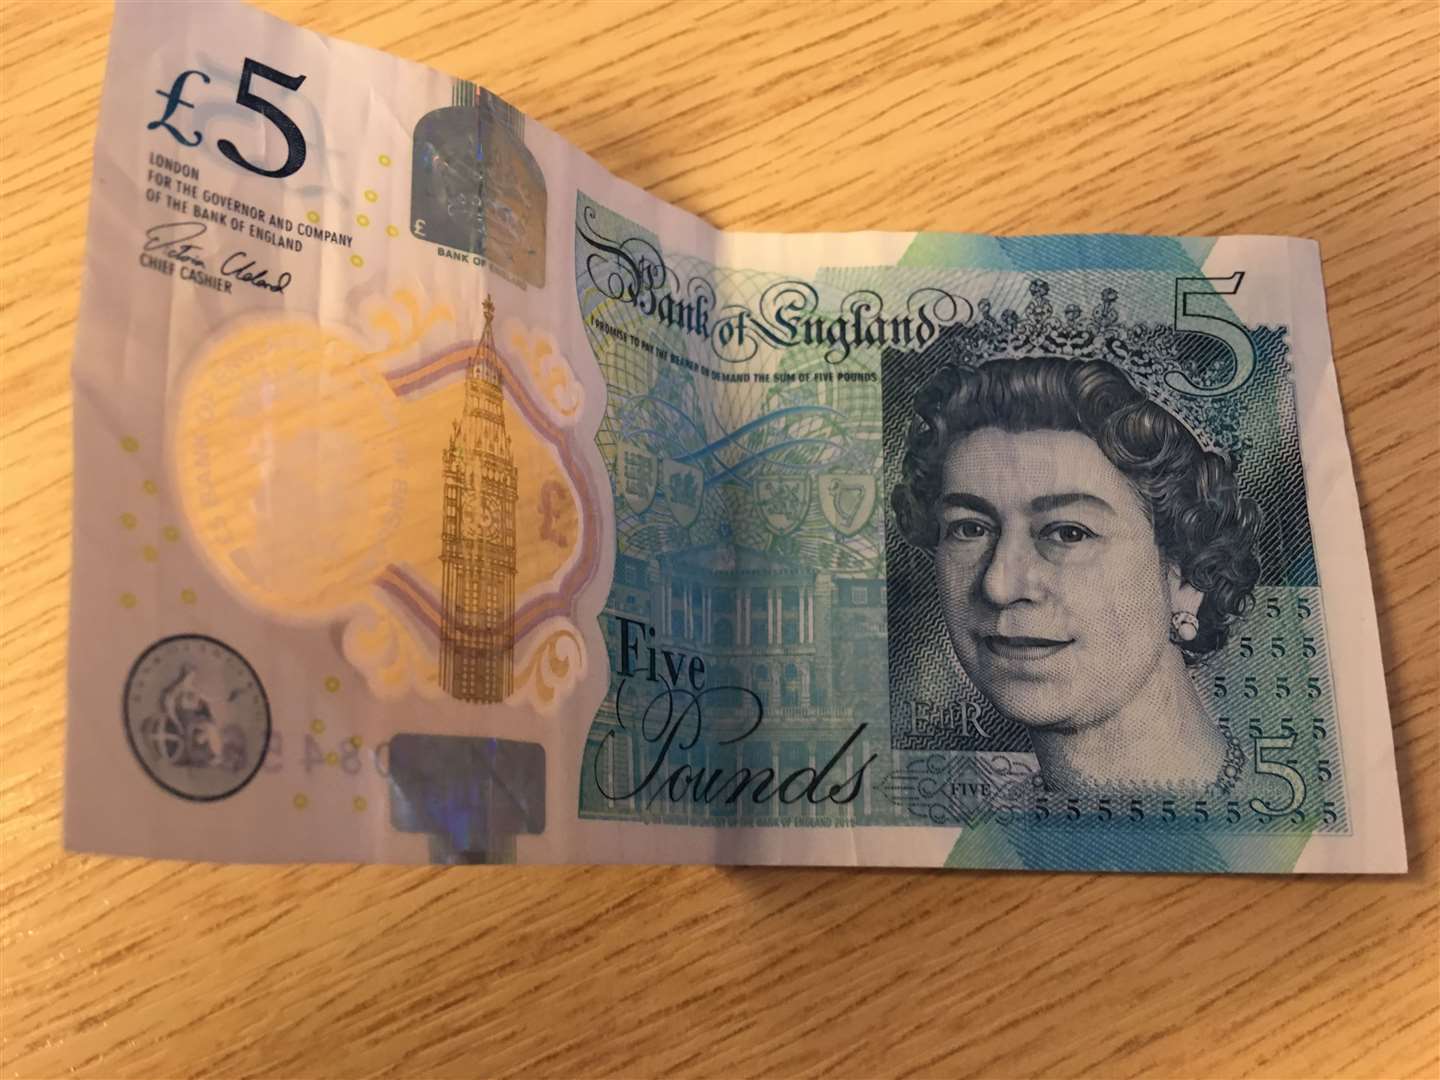 Justin Wynes stole a £5 note, which ended up costing him £185 (17067717)